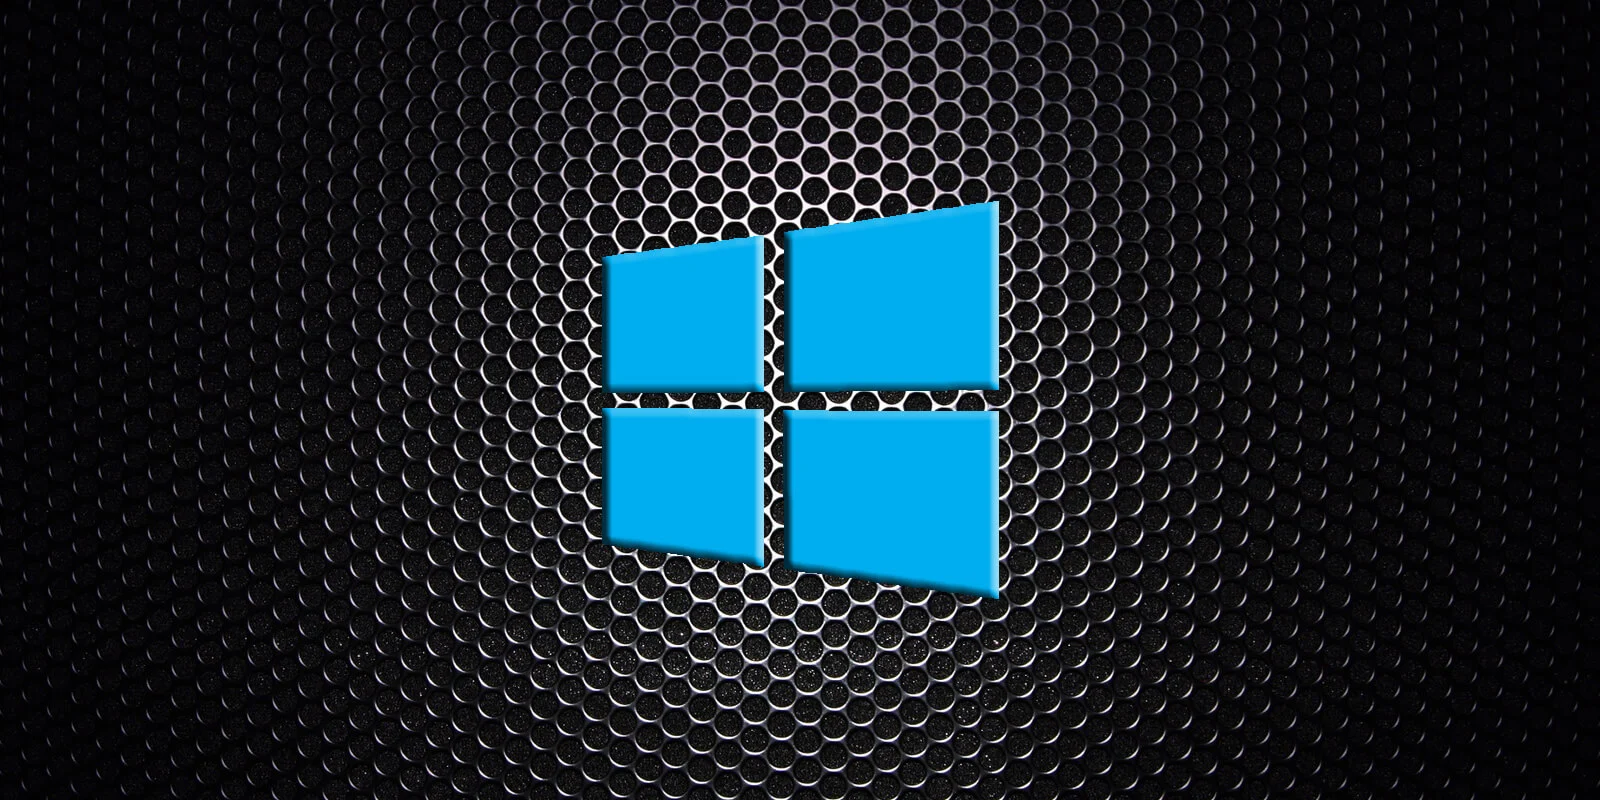 How to See Pc Specs Windows 10?